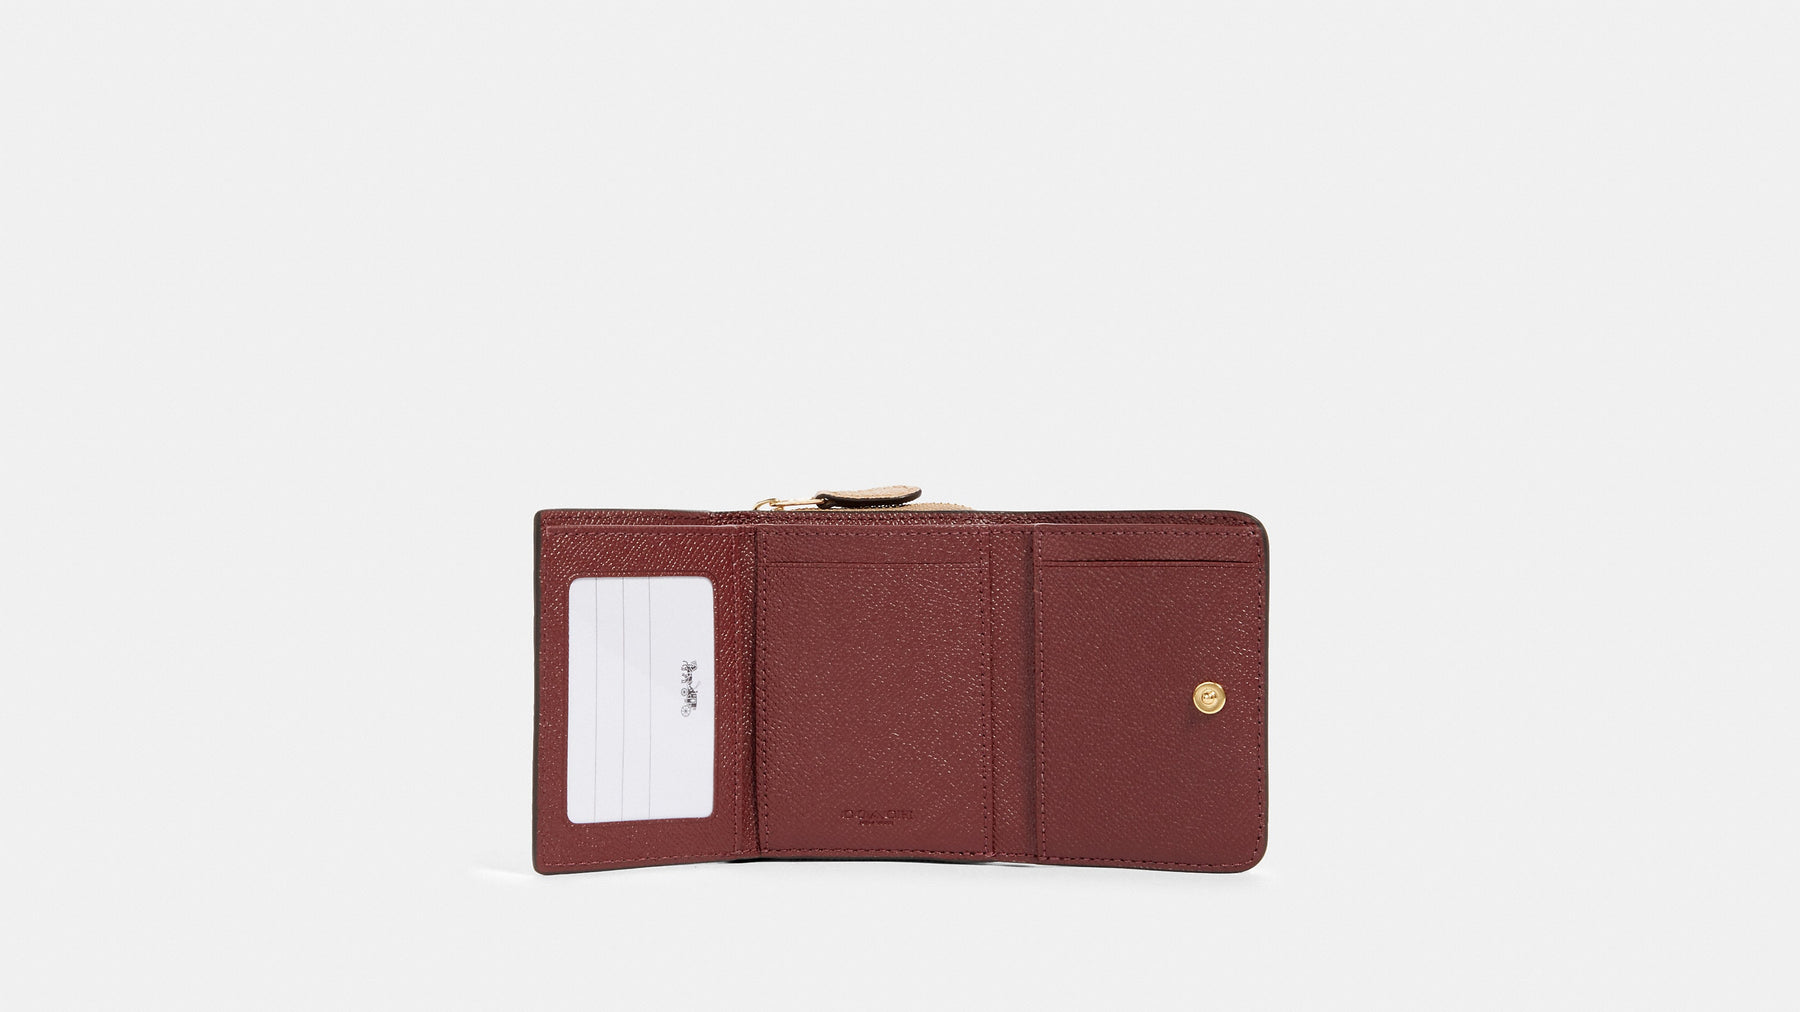 Coach-Cherry Multi Small Trifold Wallet In Colorblock – MY ROYAL CLOSET